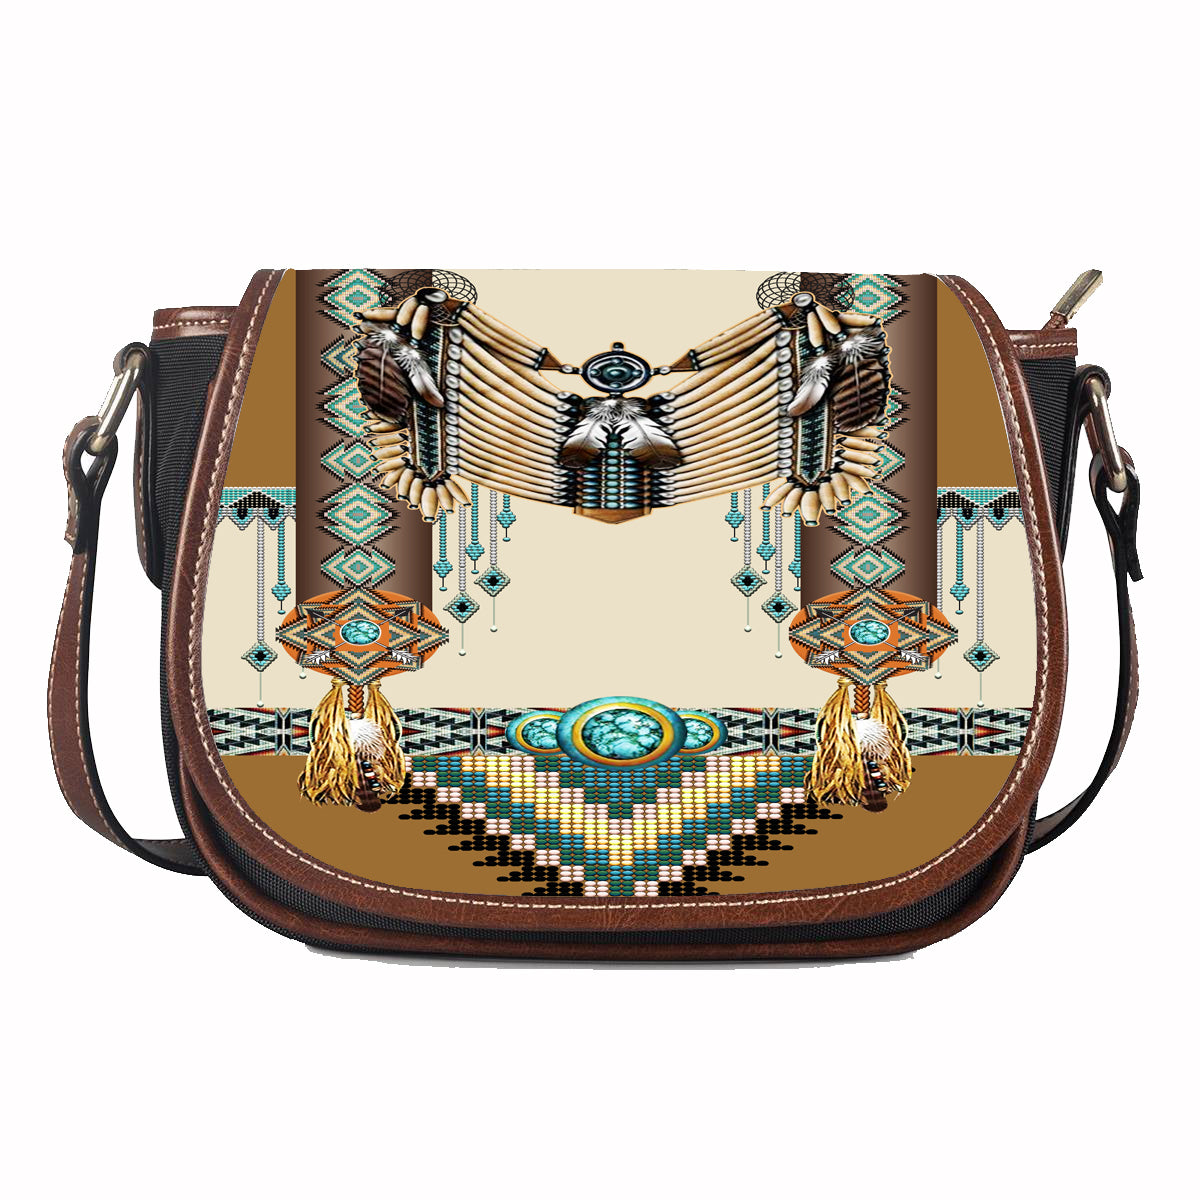 GB-NAT00059 Brown Pattern Breastplate Leather Saddle Bag - Powwow Store